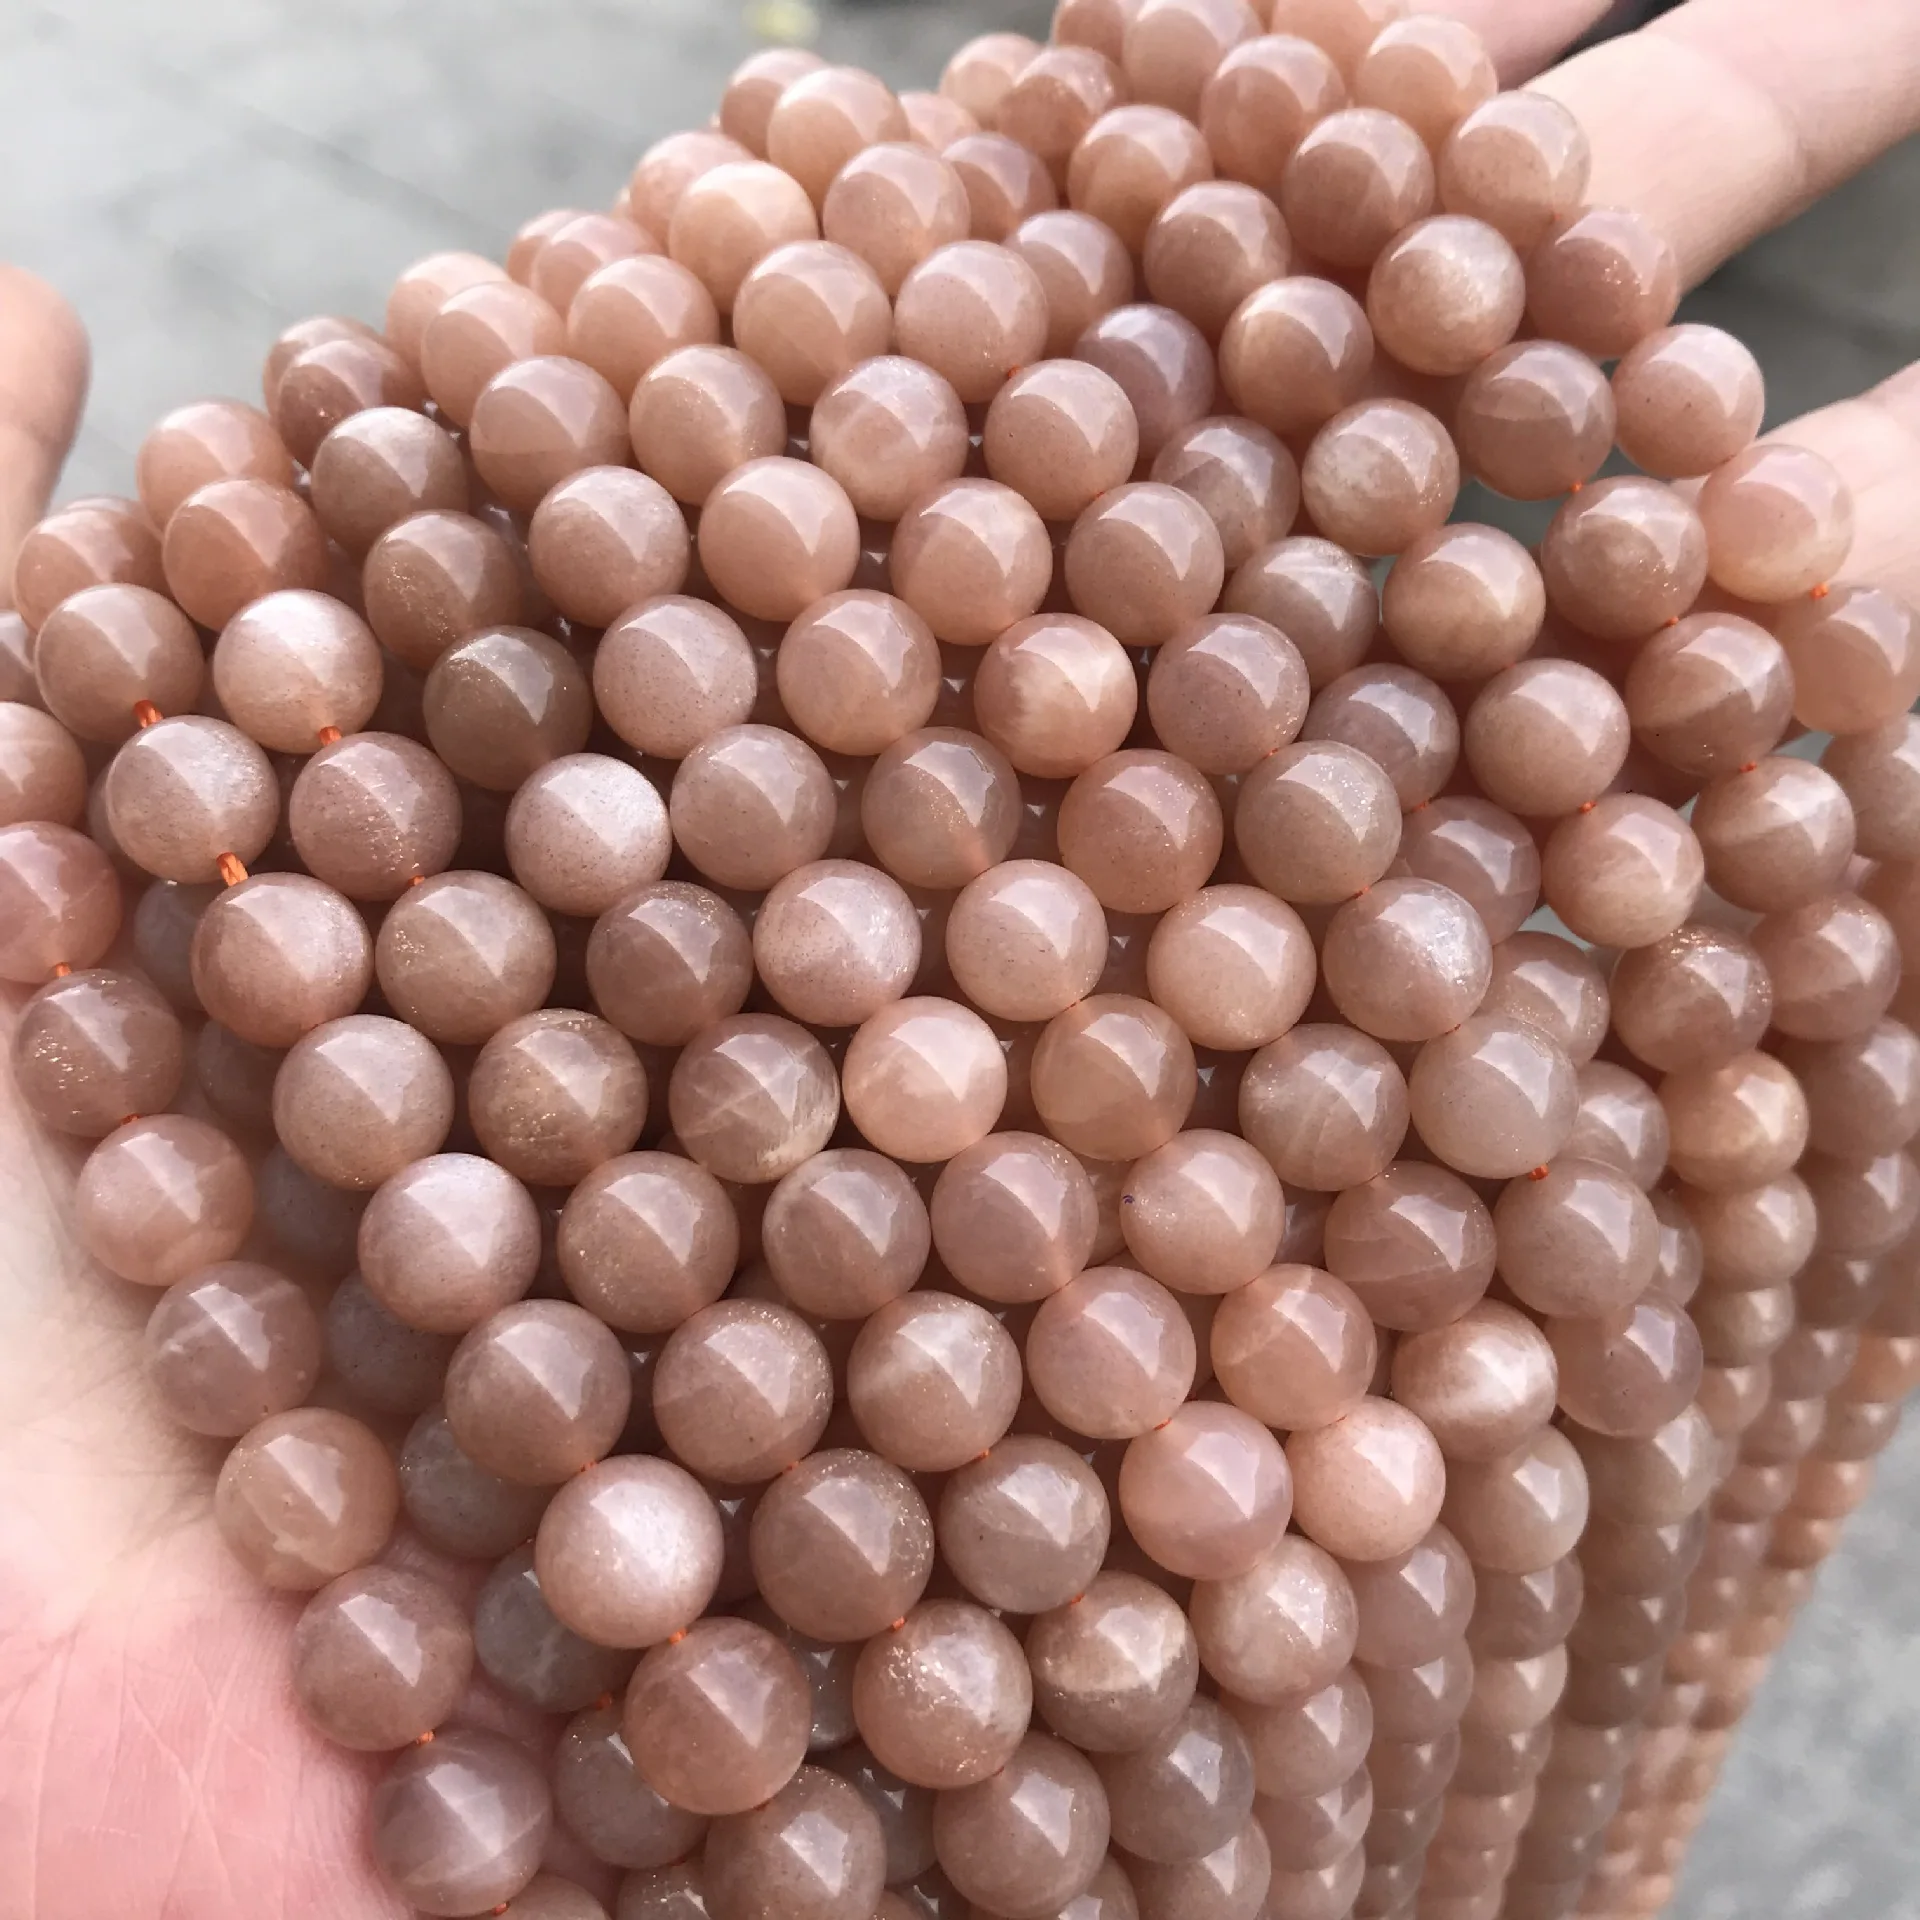 

Natural Grade A Quality Precious Gemstone Loose Round Beads Orange Peach Moon Stone Sunstone Beads for Jewelry Making